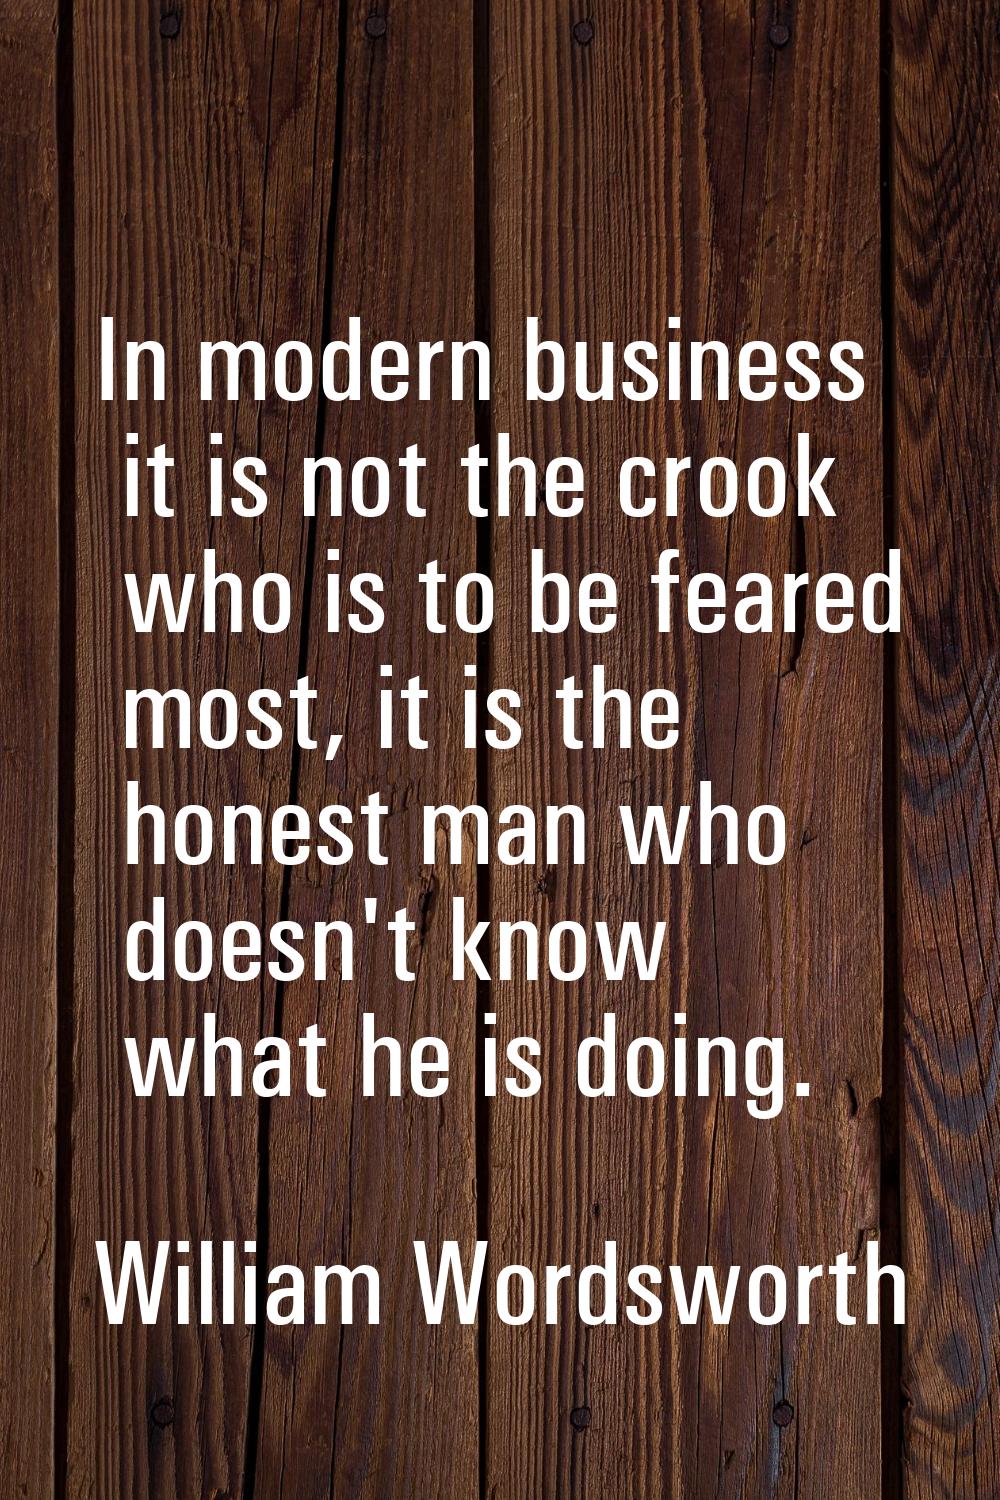 In modern business it is not the crook who is to be feared most, it is the honest man who doesn't k